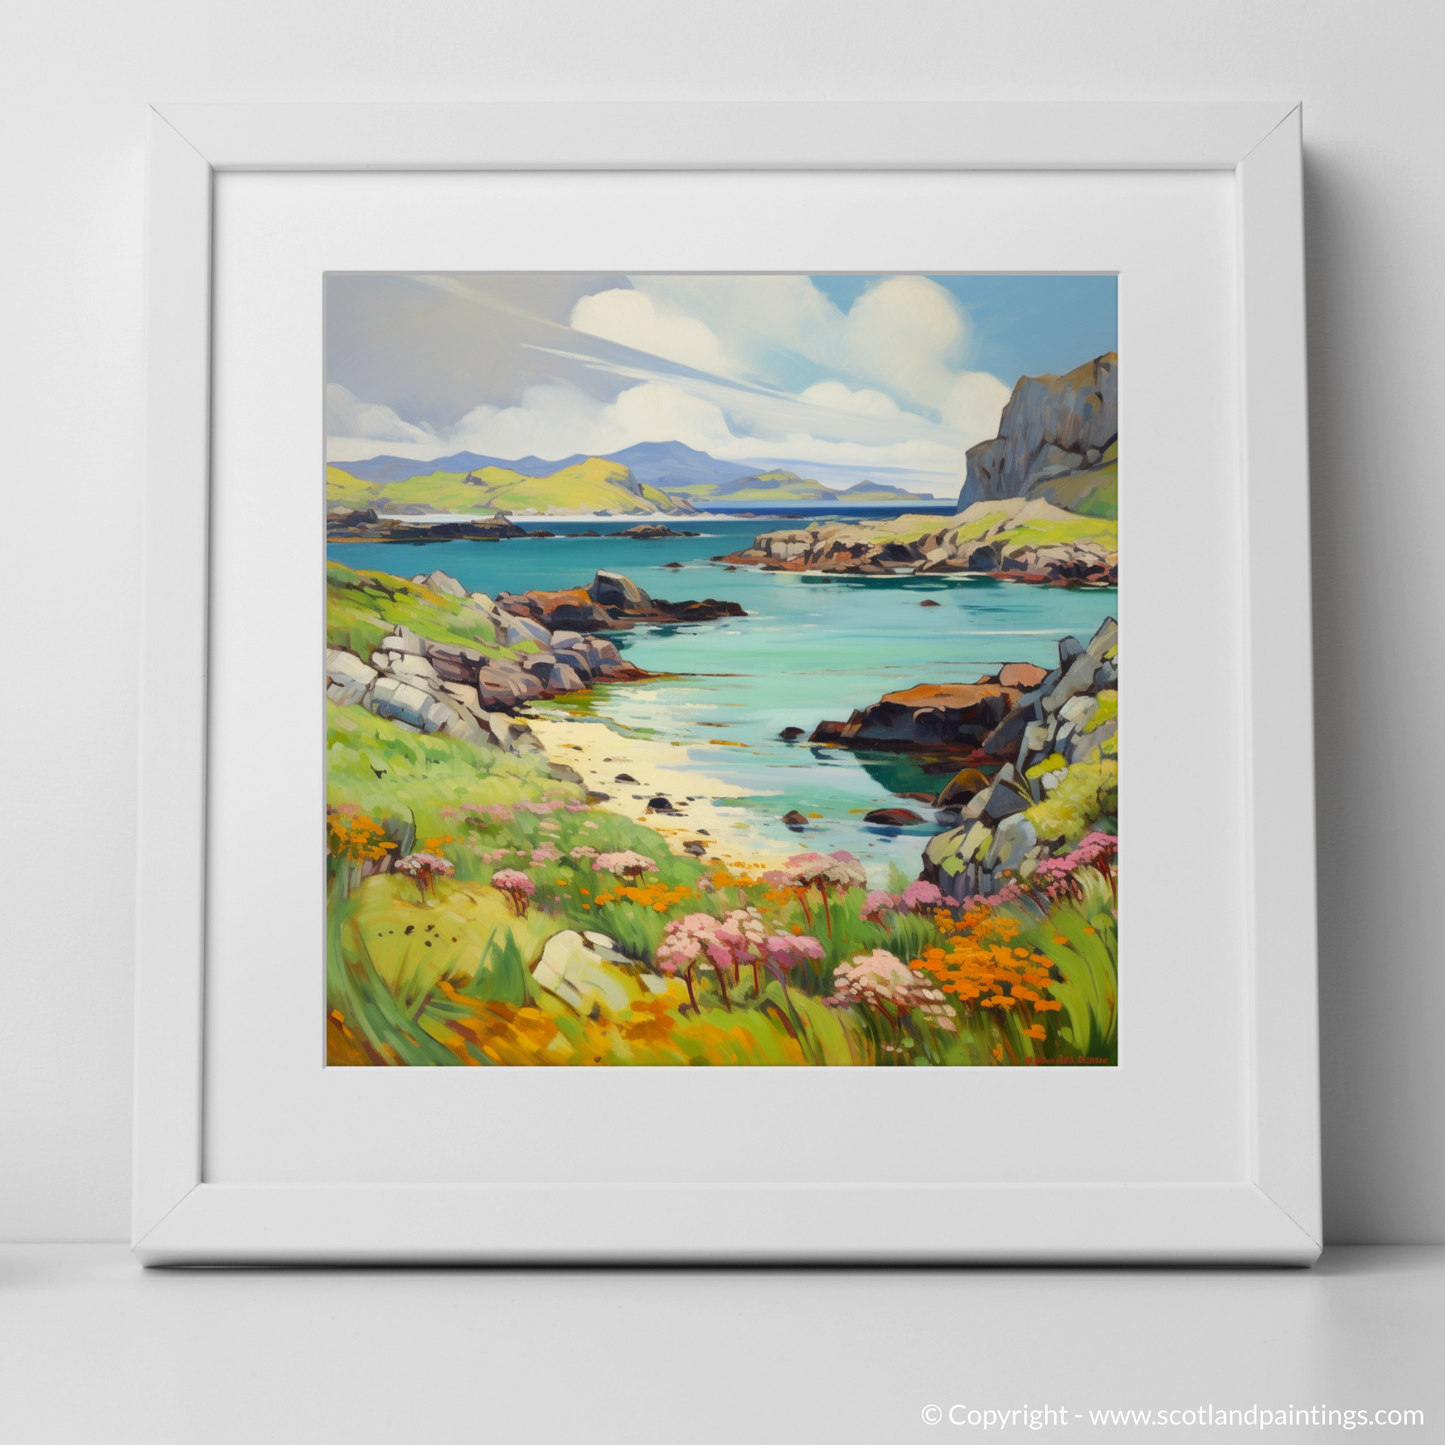 Art Print of Isle of Mull, Inner Hebrides in summer with a white frame